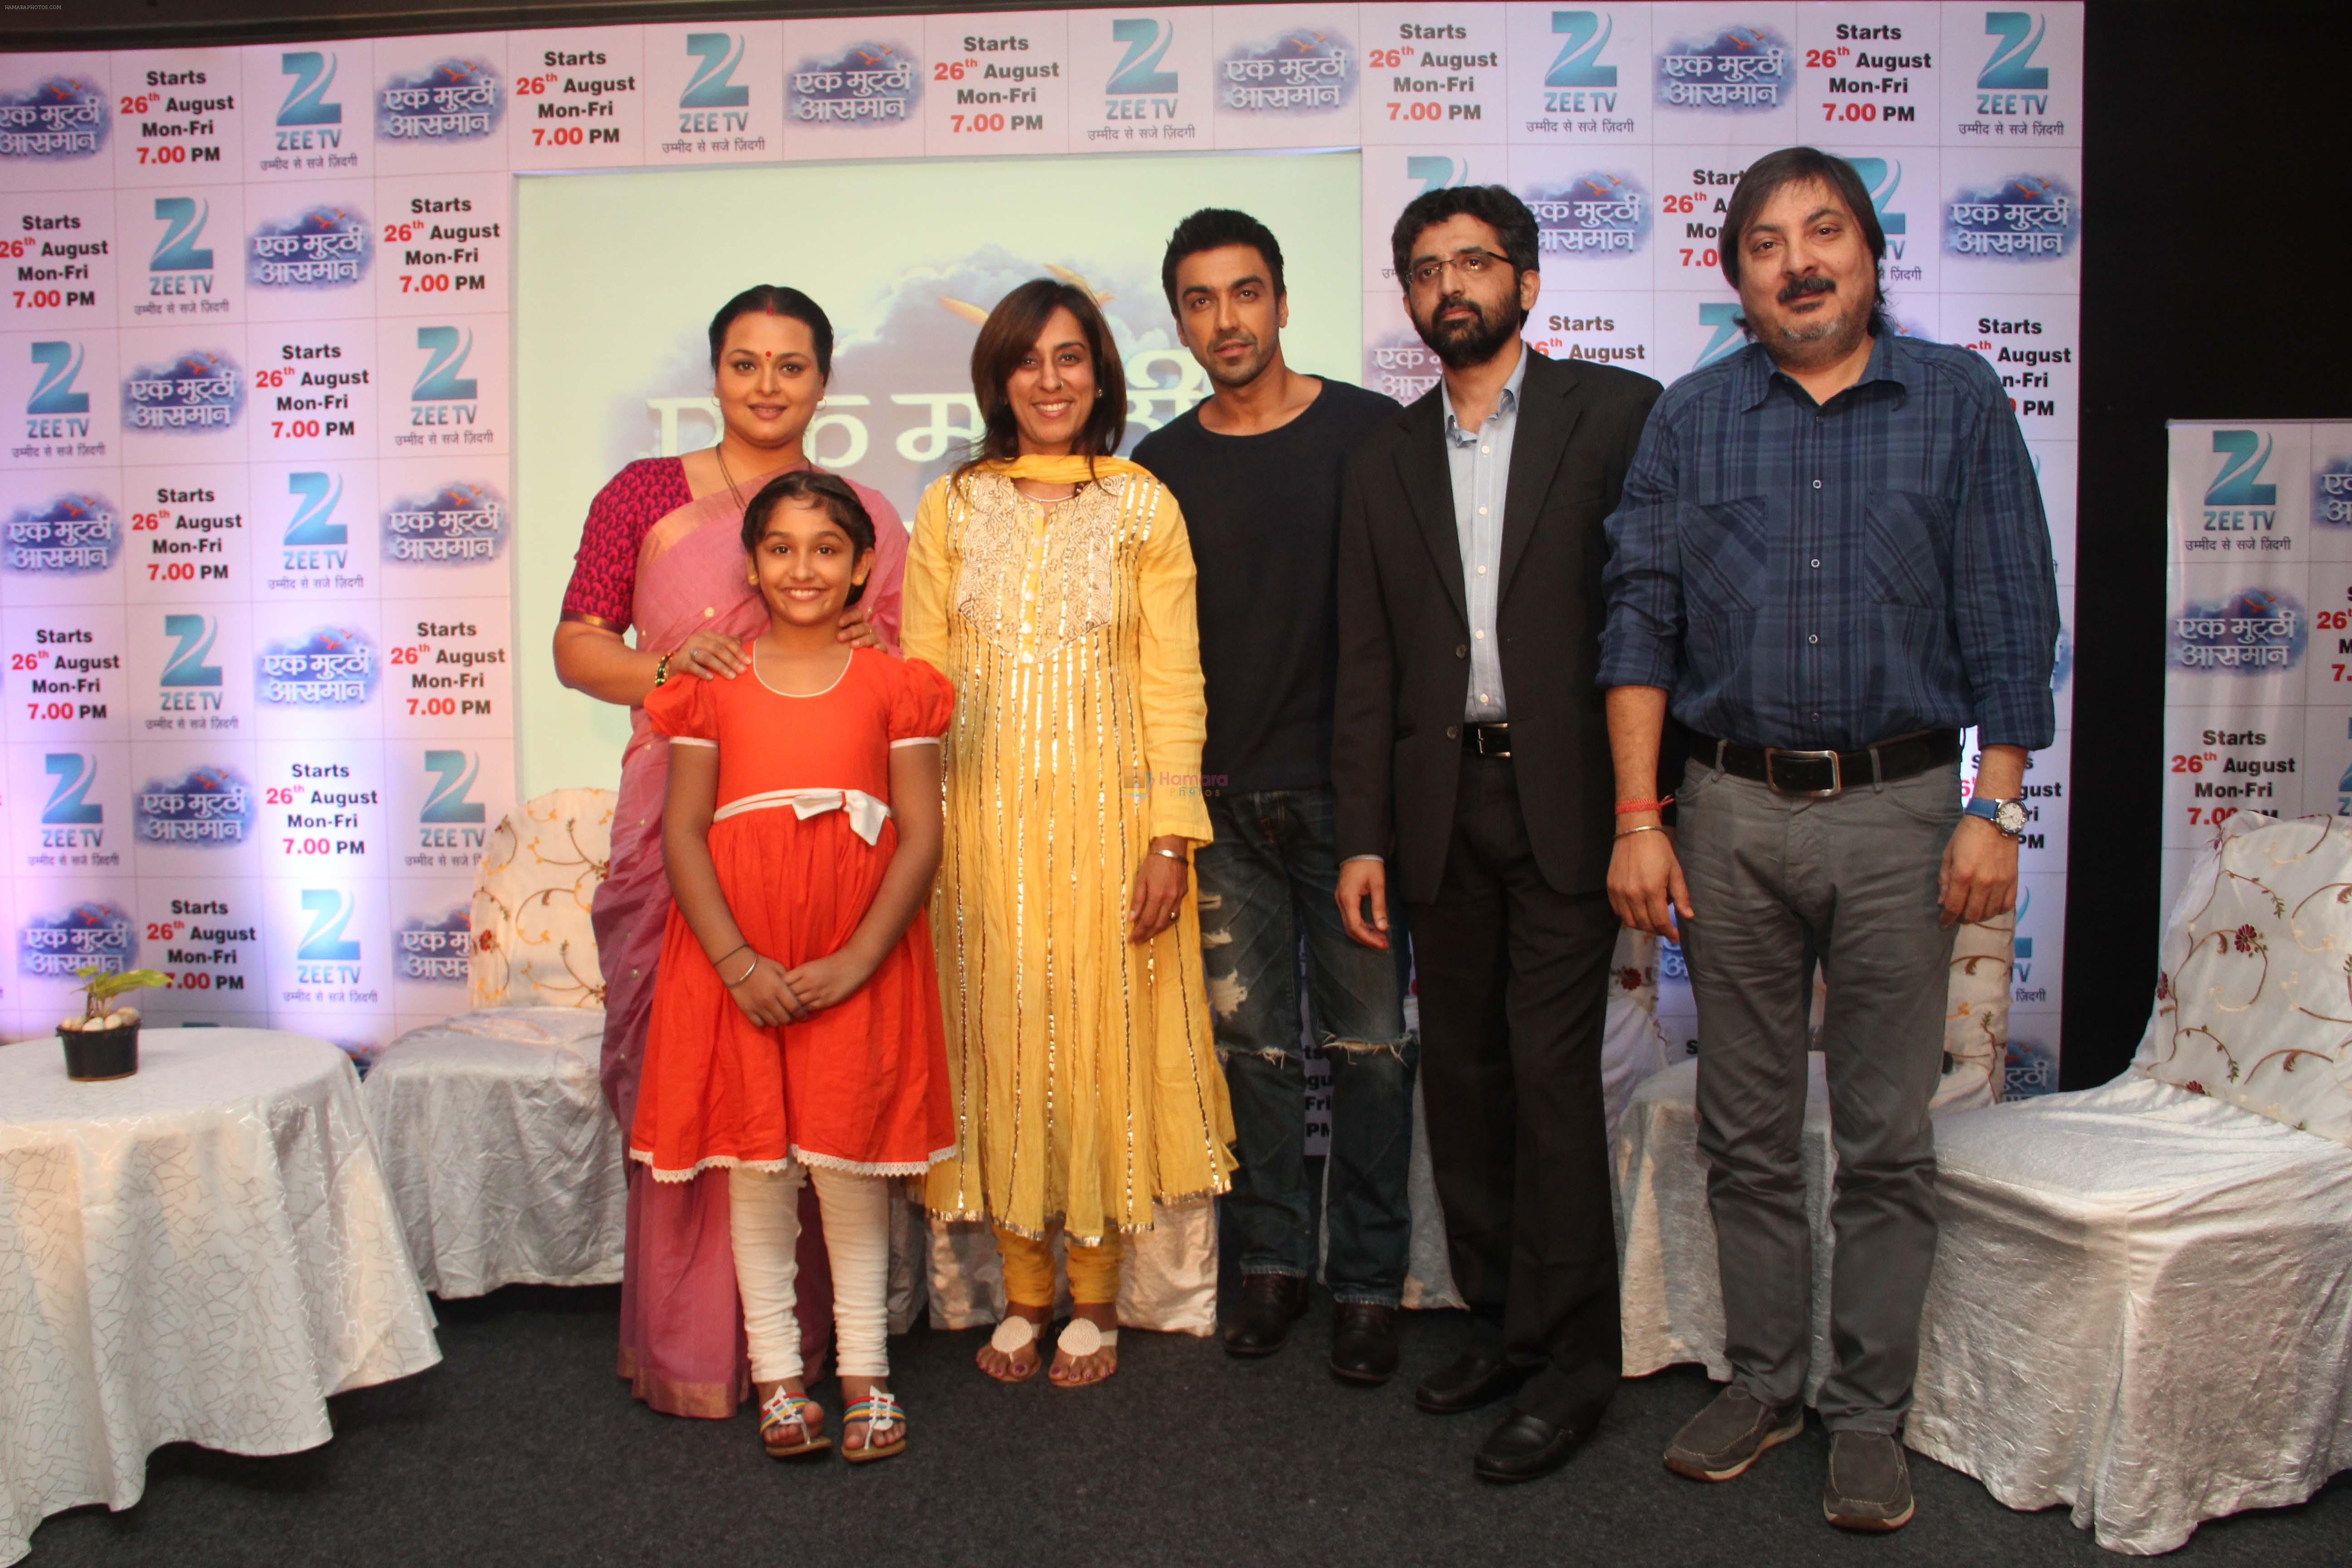 The Cast of Zee TV's new show Ek Muthi Aasman